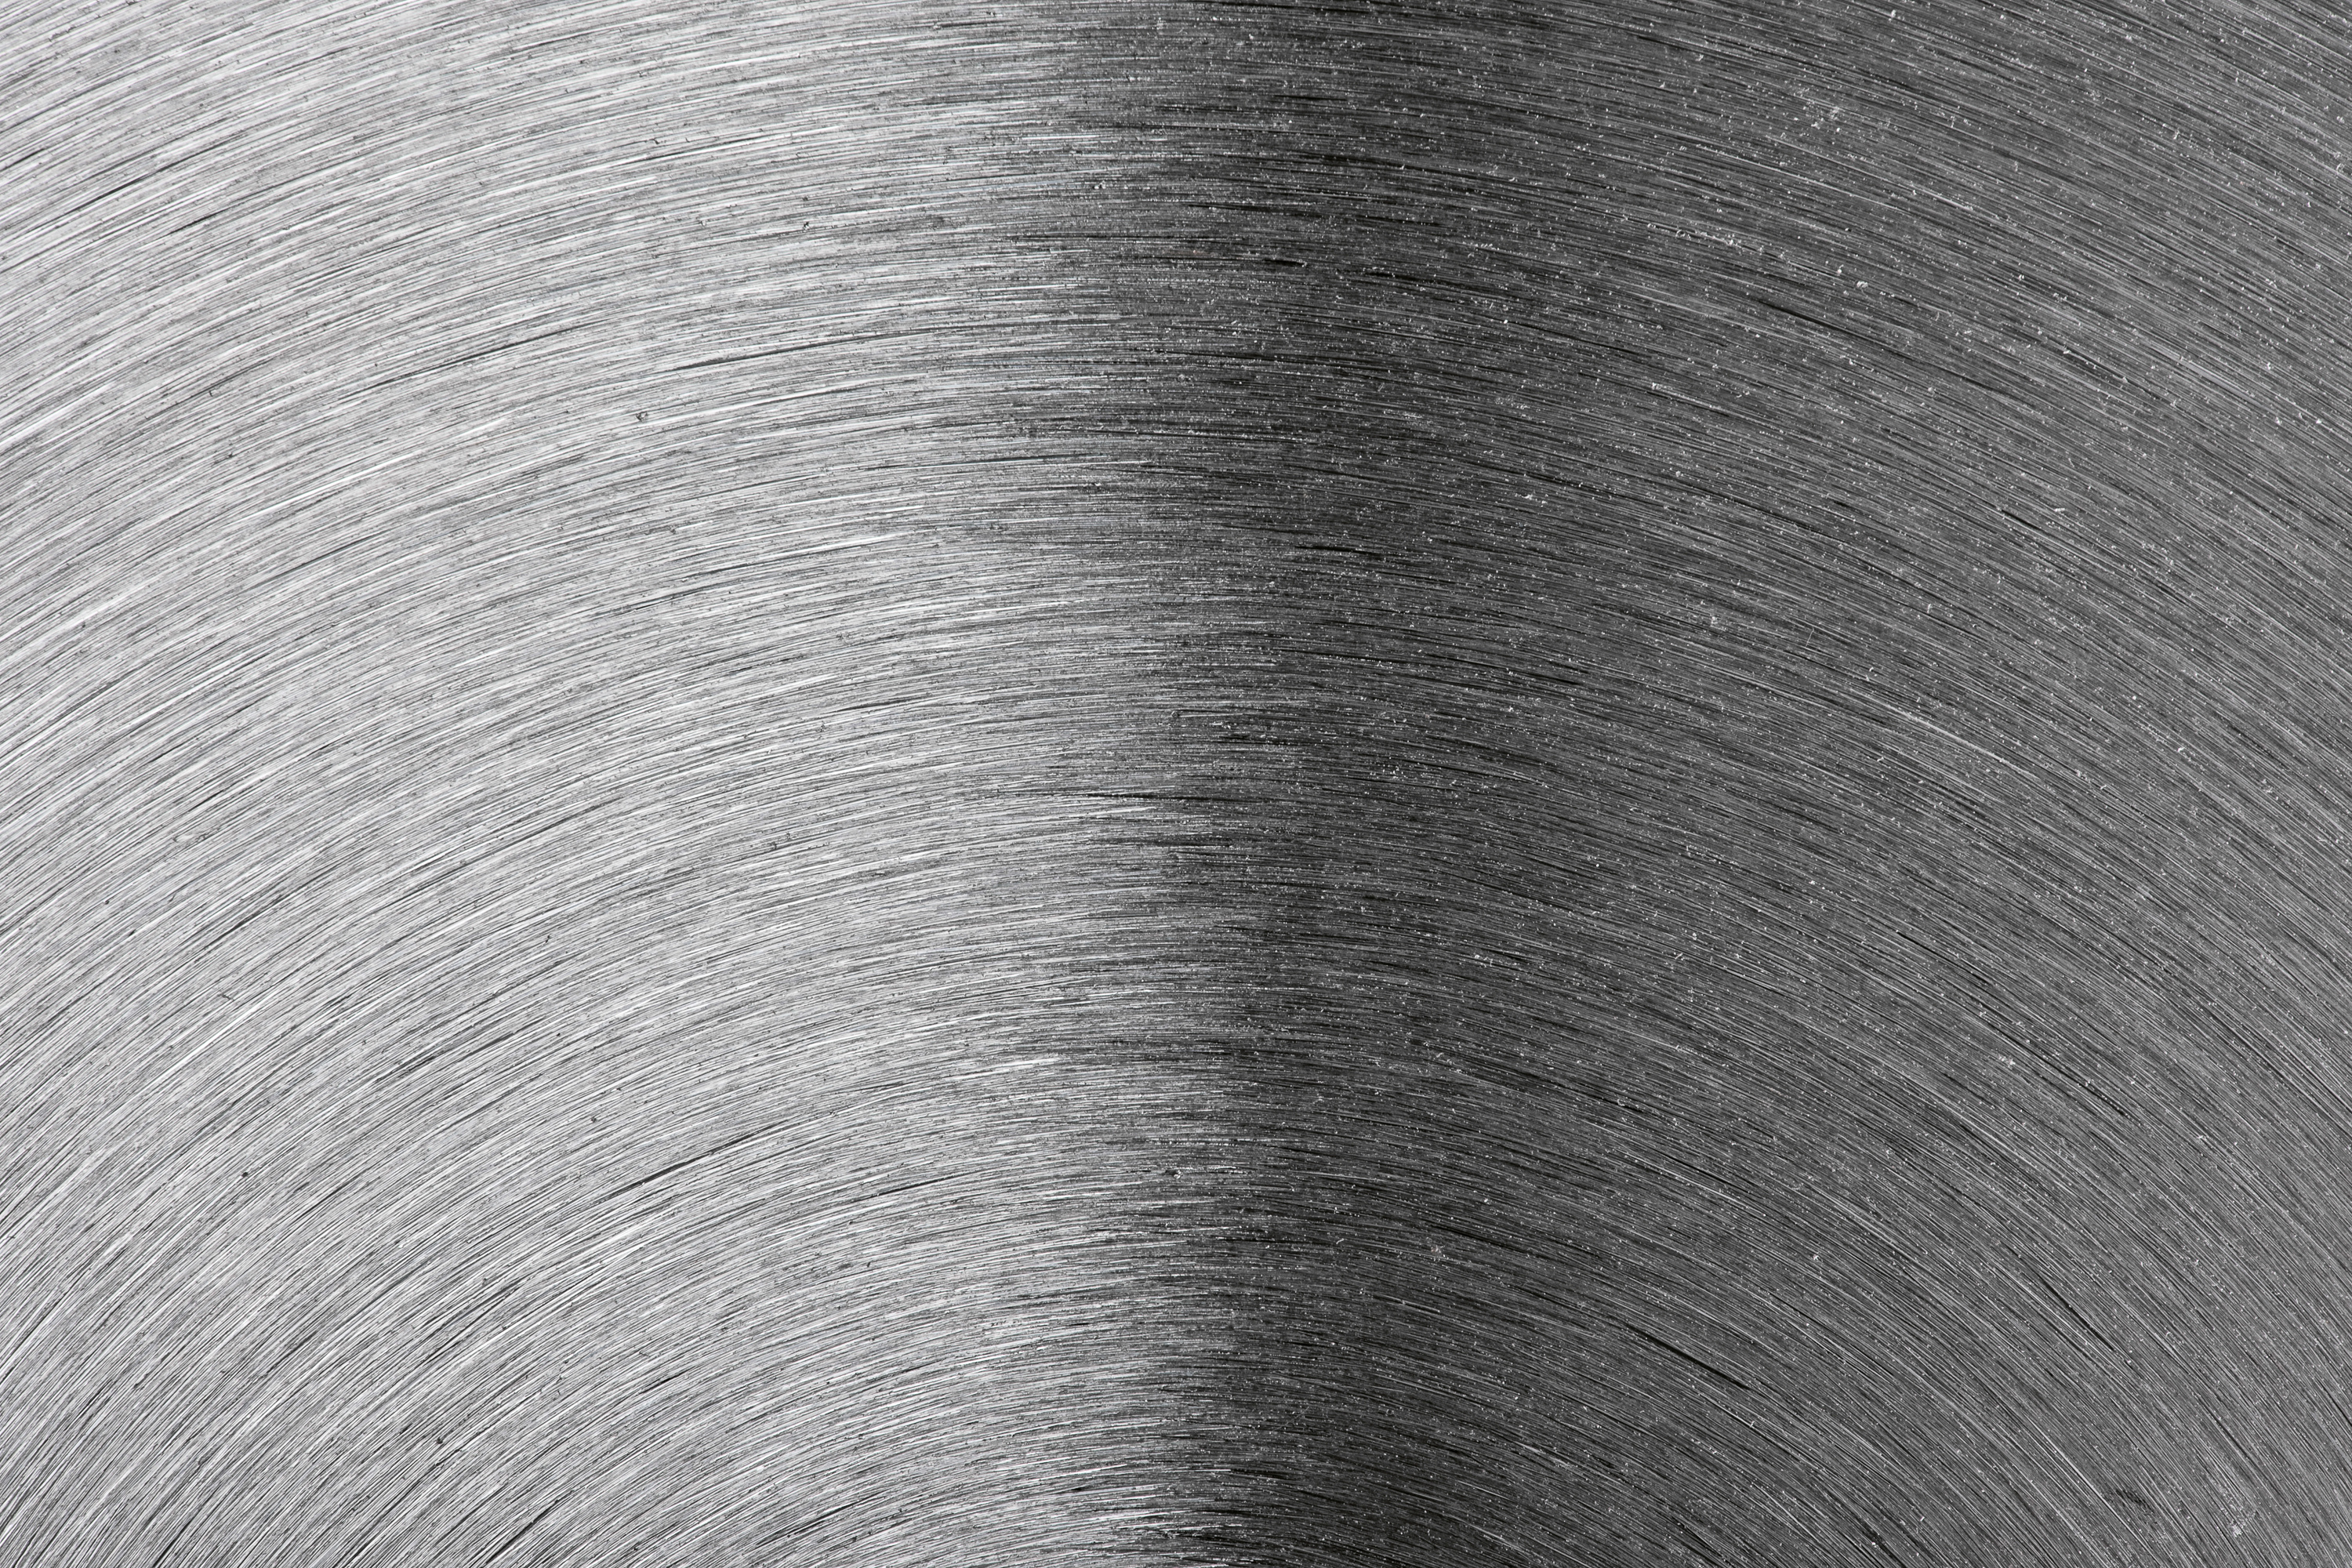 Brushed metal texture, Abstract reflection metal, Metal texture abstract, Free photo brushed, 3000x2000 HD Desktop